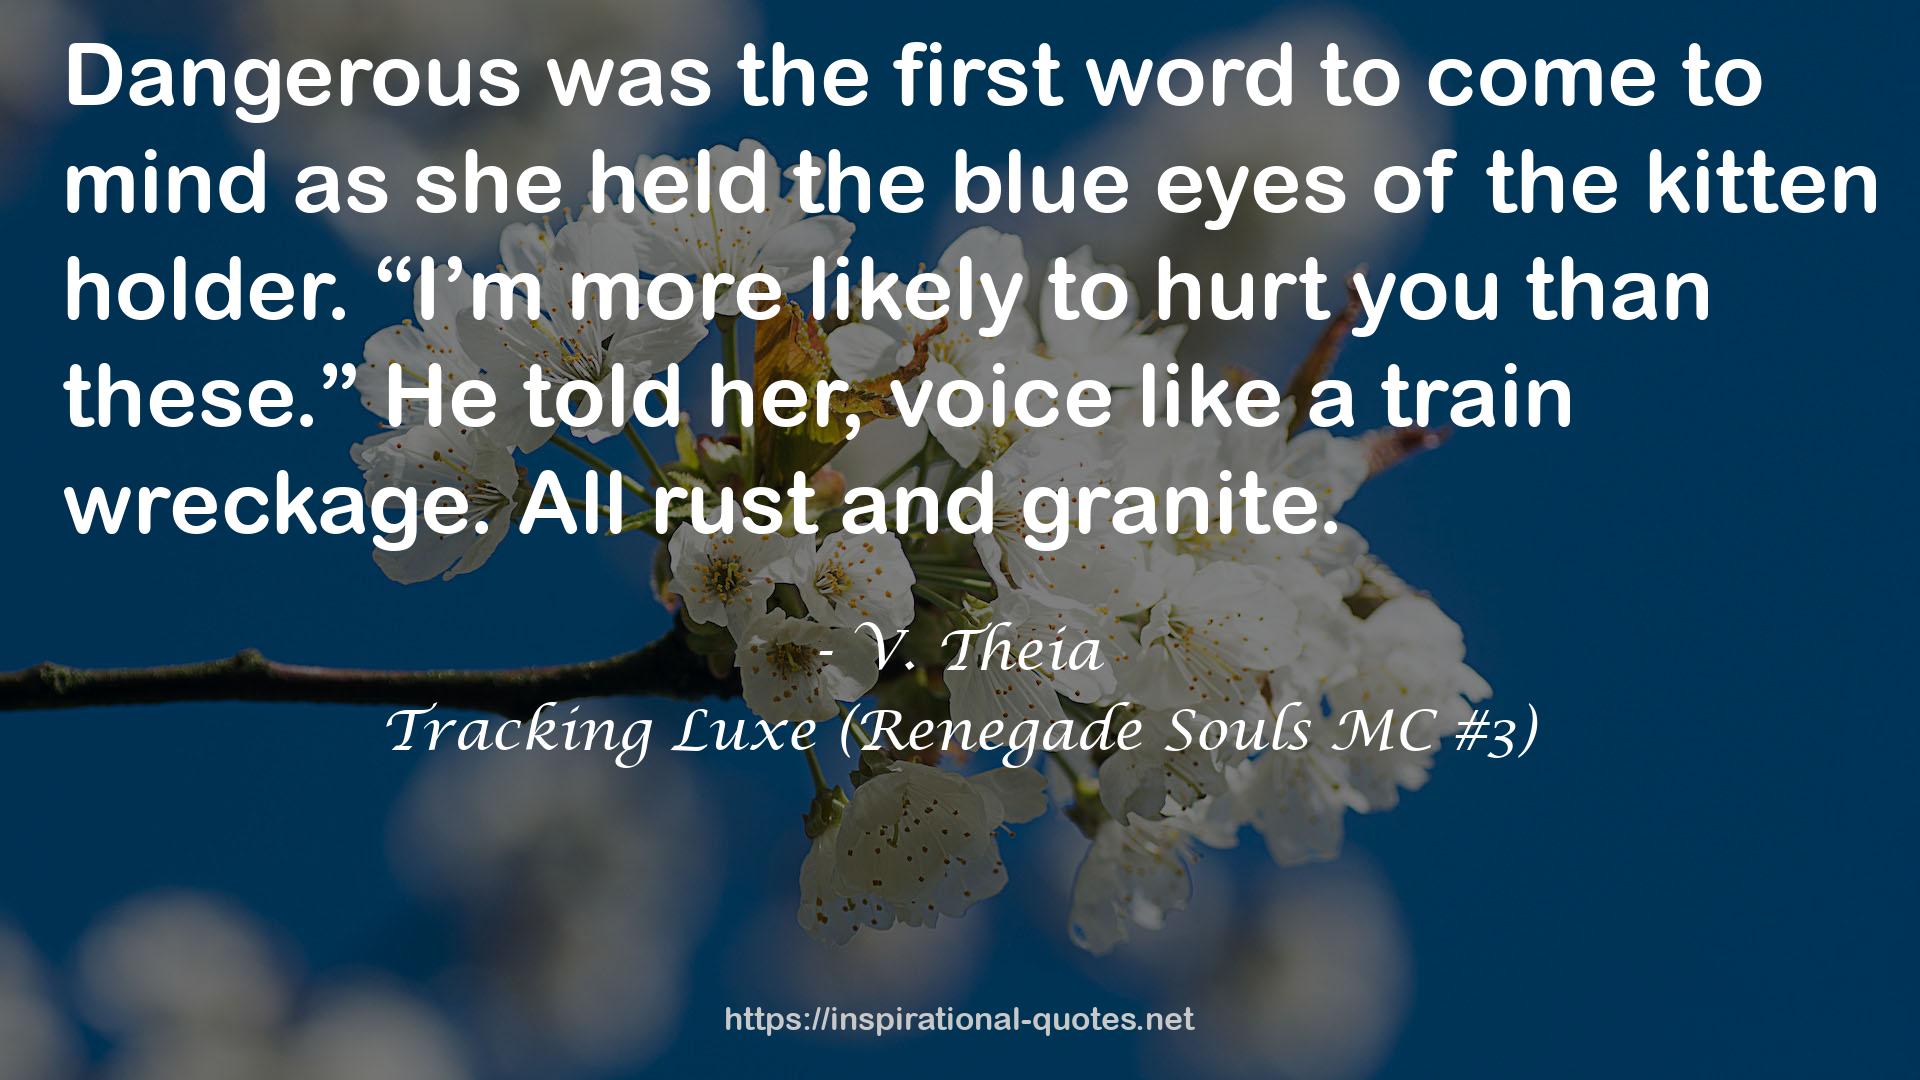 Tracking Luxe (Renegade Souls MC #3) QUOTES